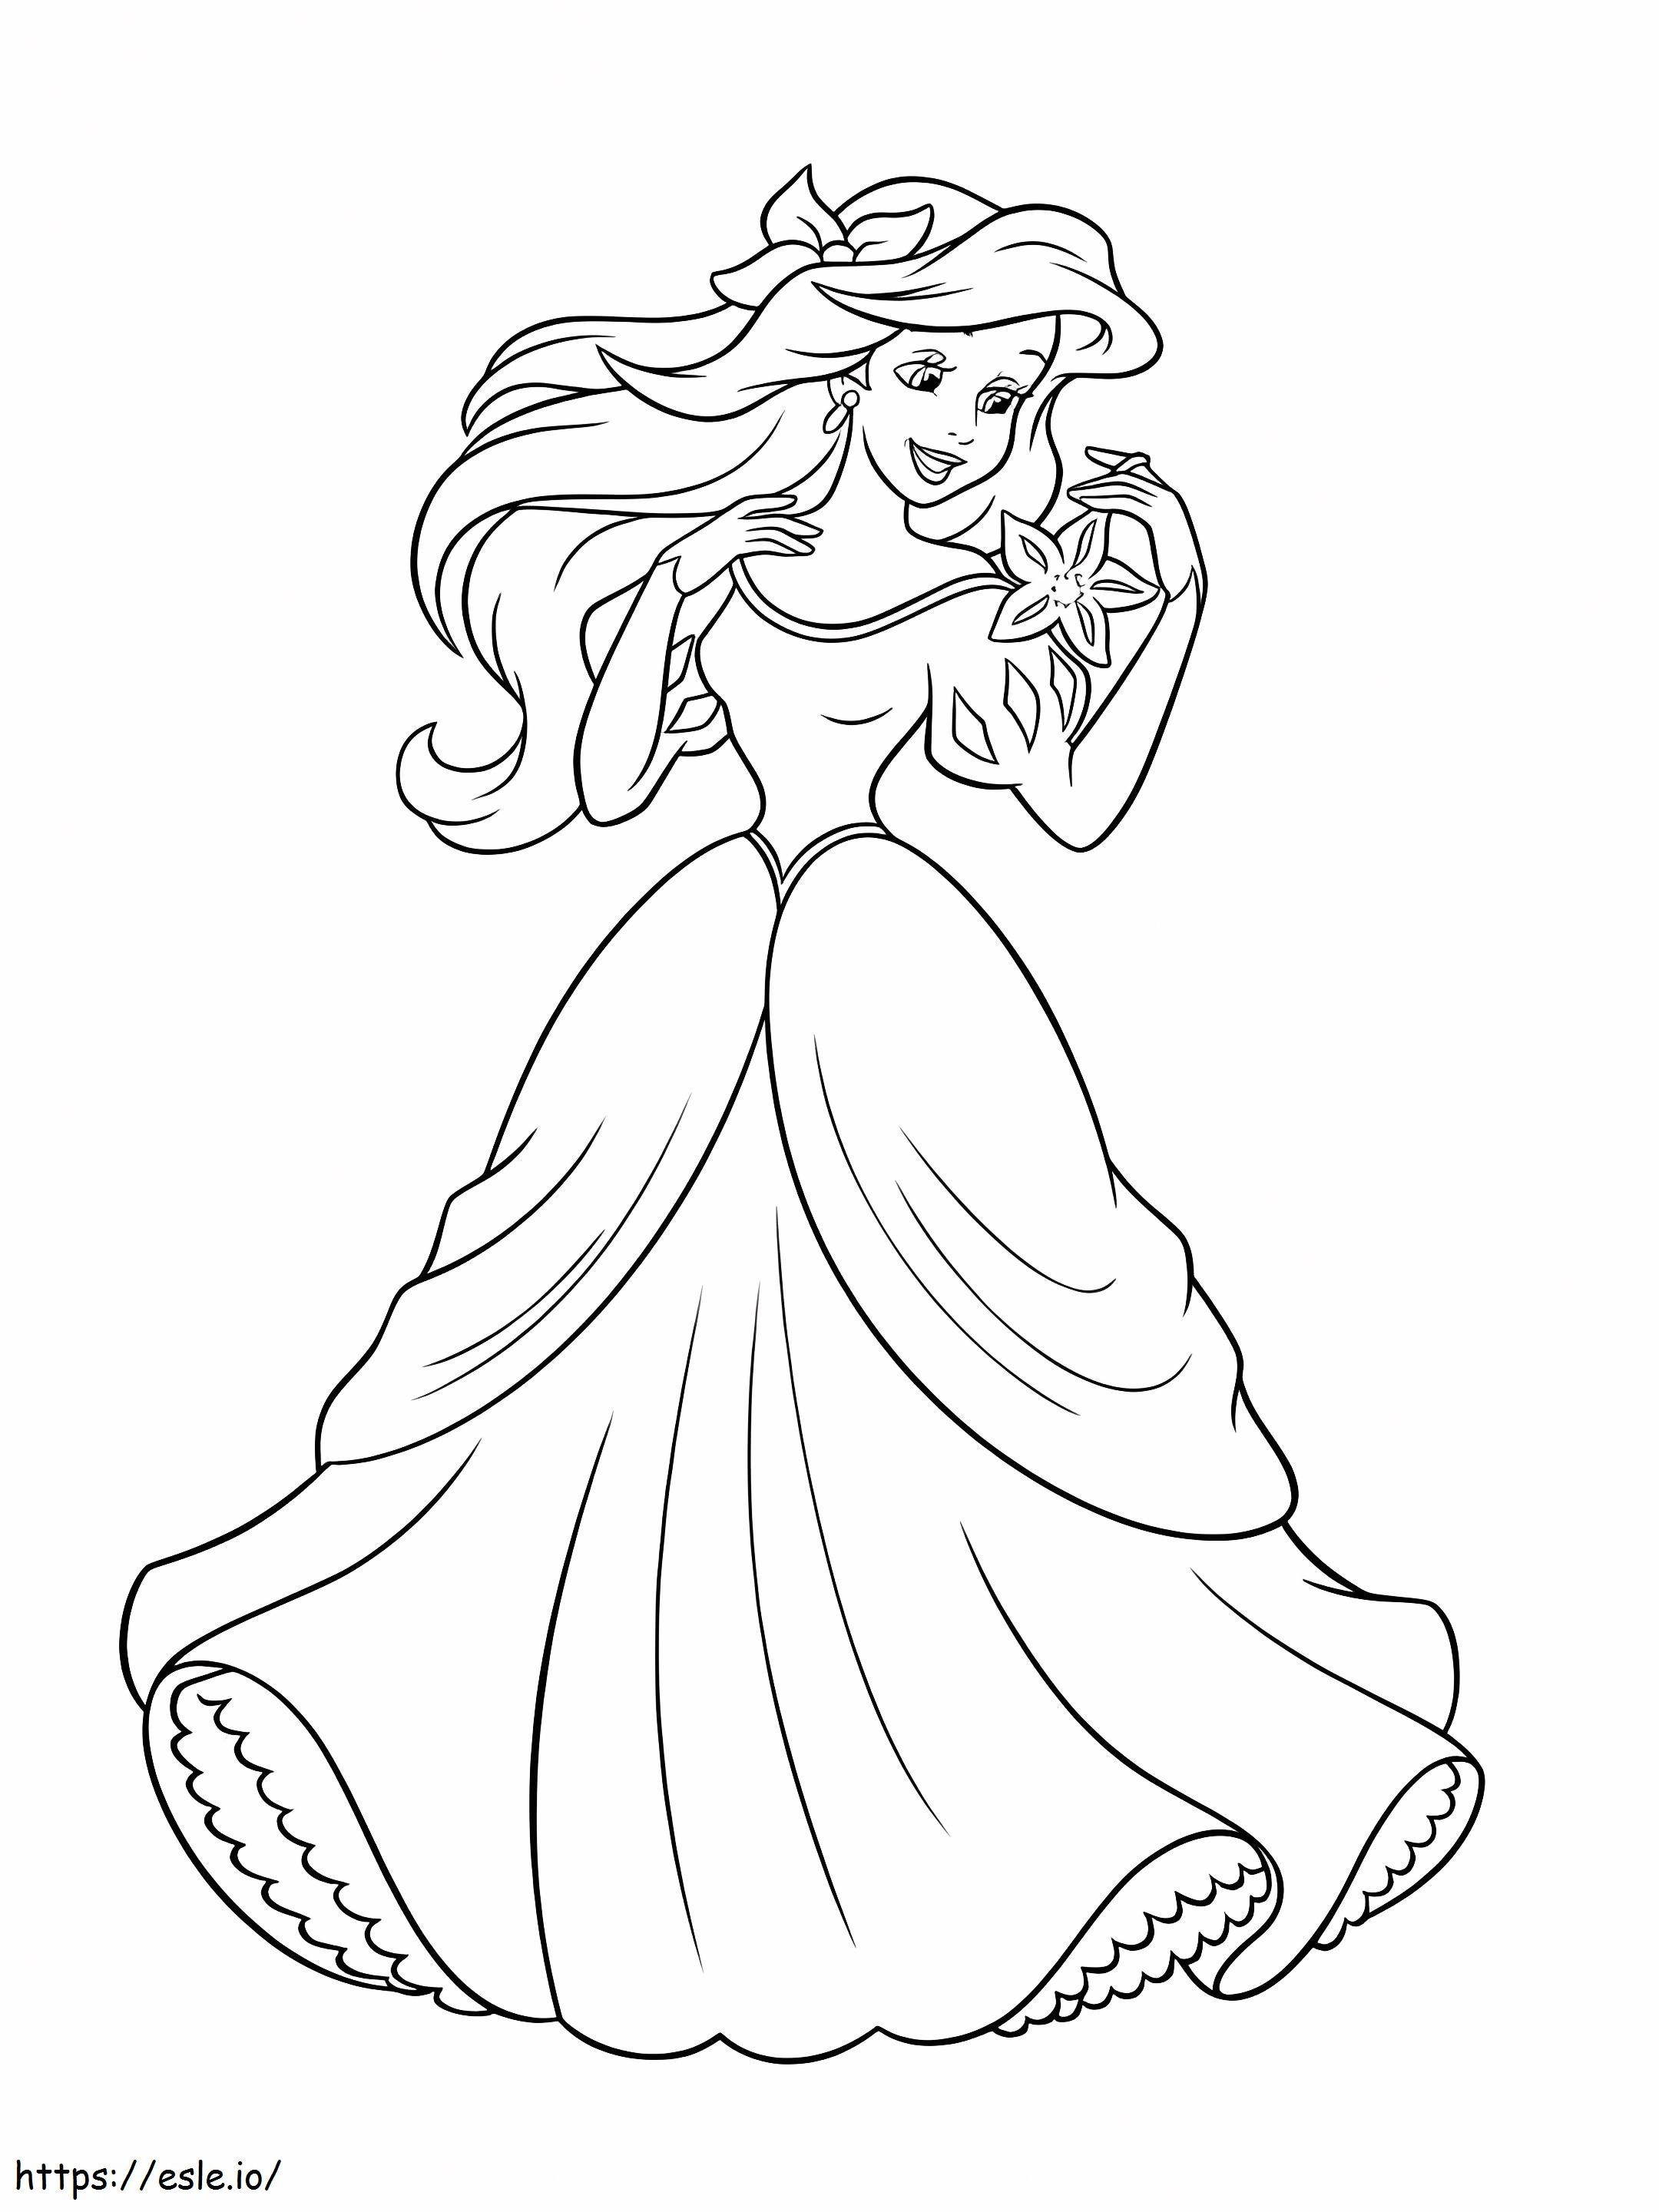 Awesome Ariel coloring page